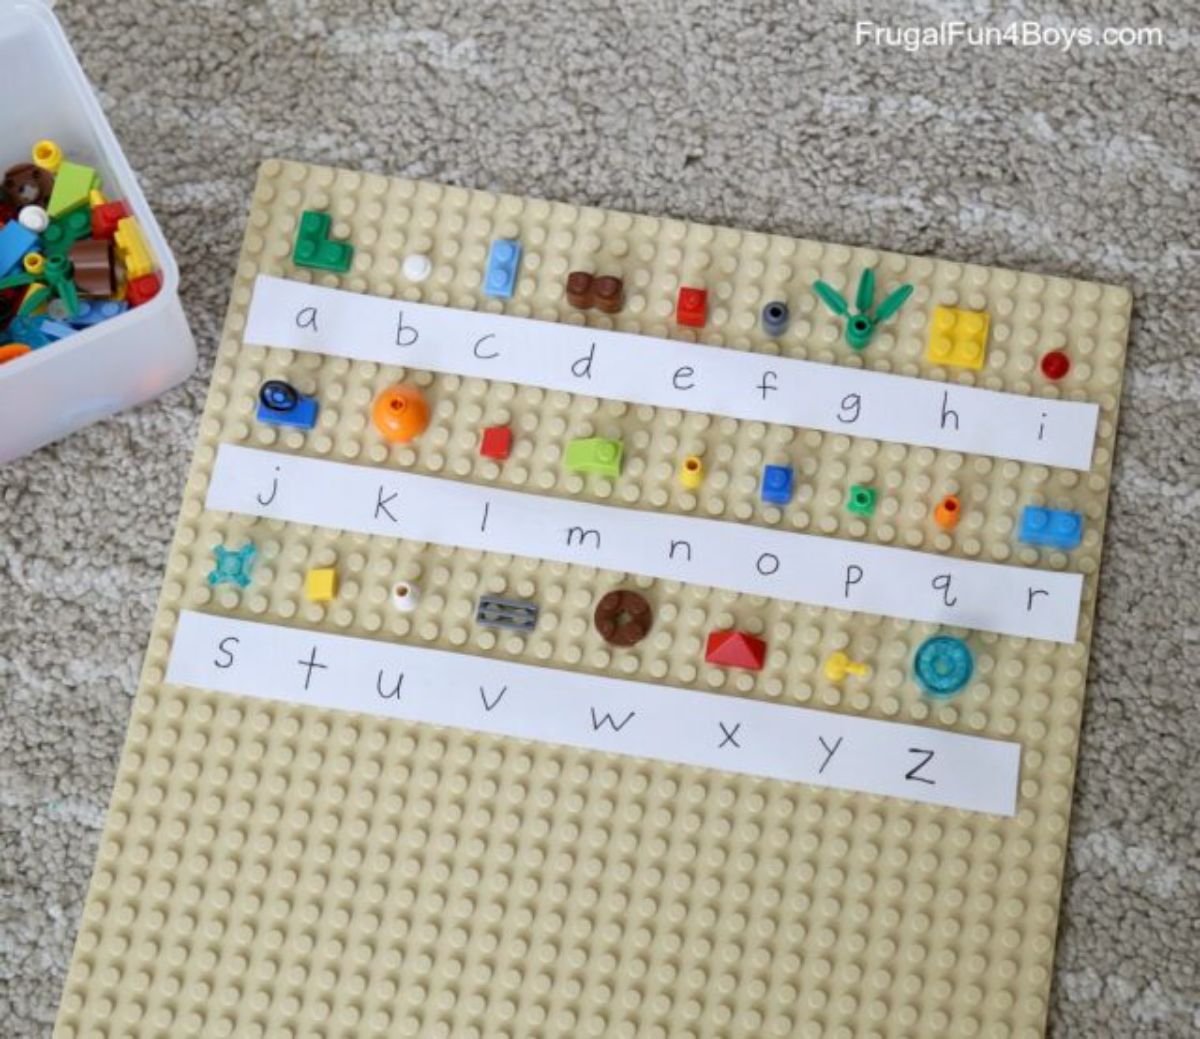 a sand colored lego board has strips of paper with the alphabet written on them. A lego brick is assigned to each letter